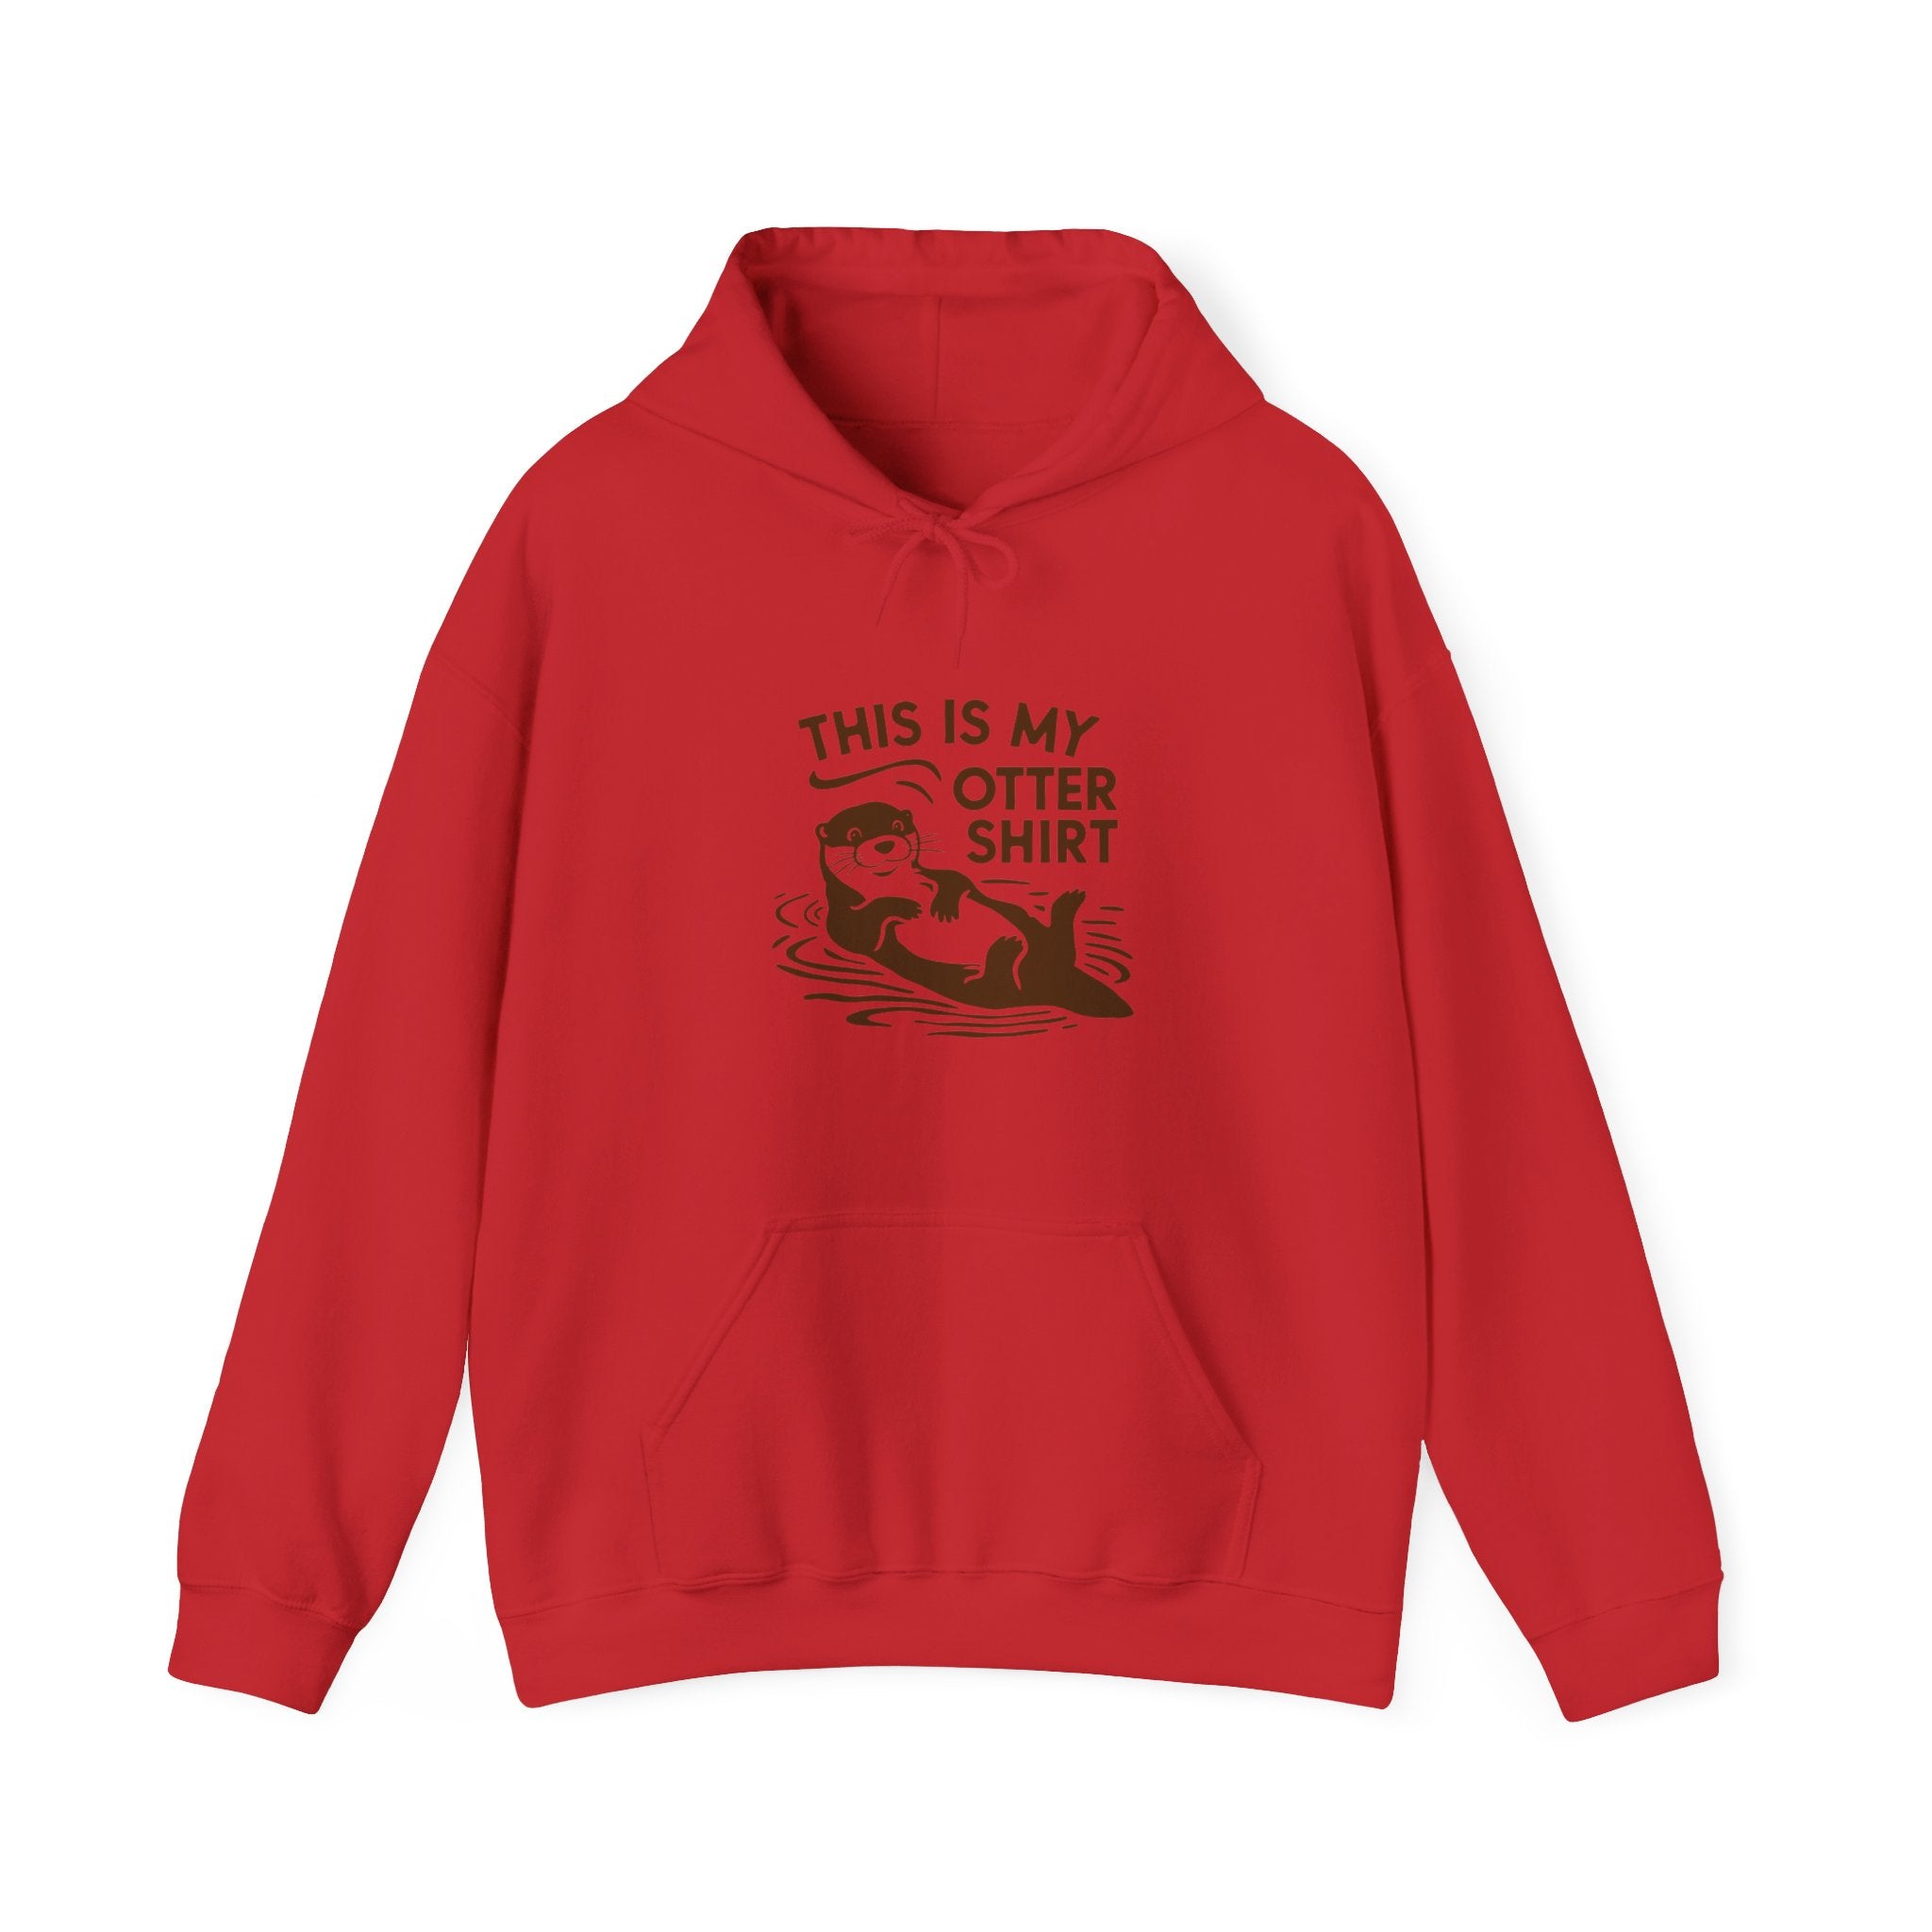 This My Otter Shirt - Hooded Sweatshirt features a cozy interior and a charming graphic of an otter holding a fish, coupled with the playful text "This is My Otter Shirt.